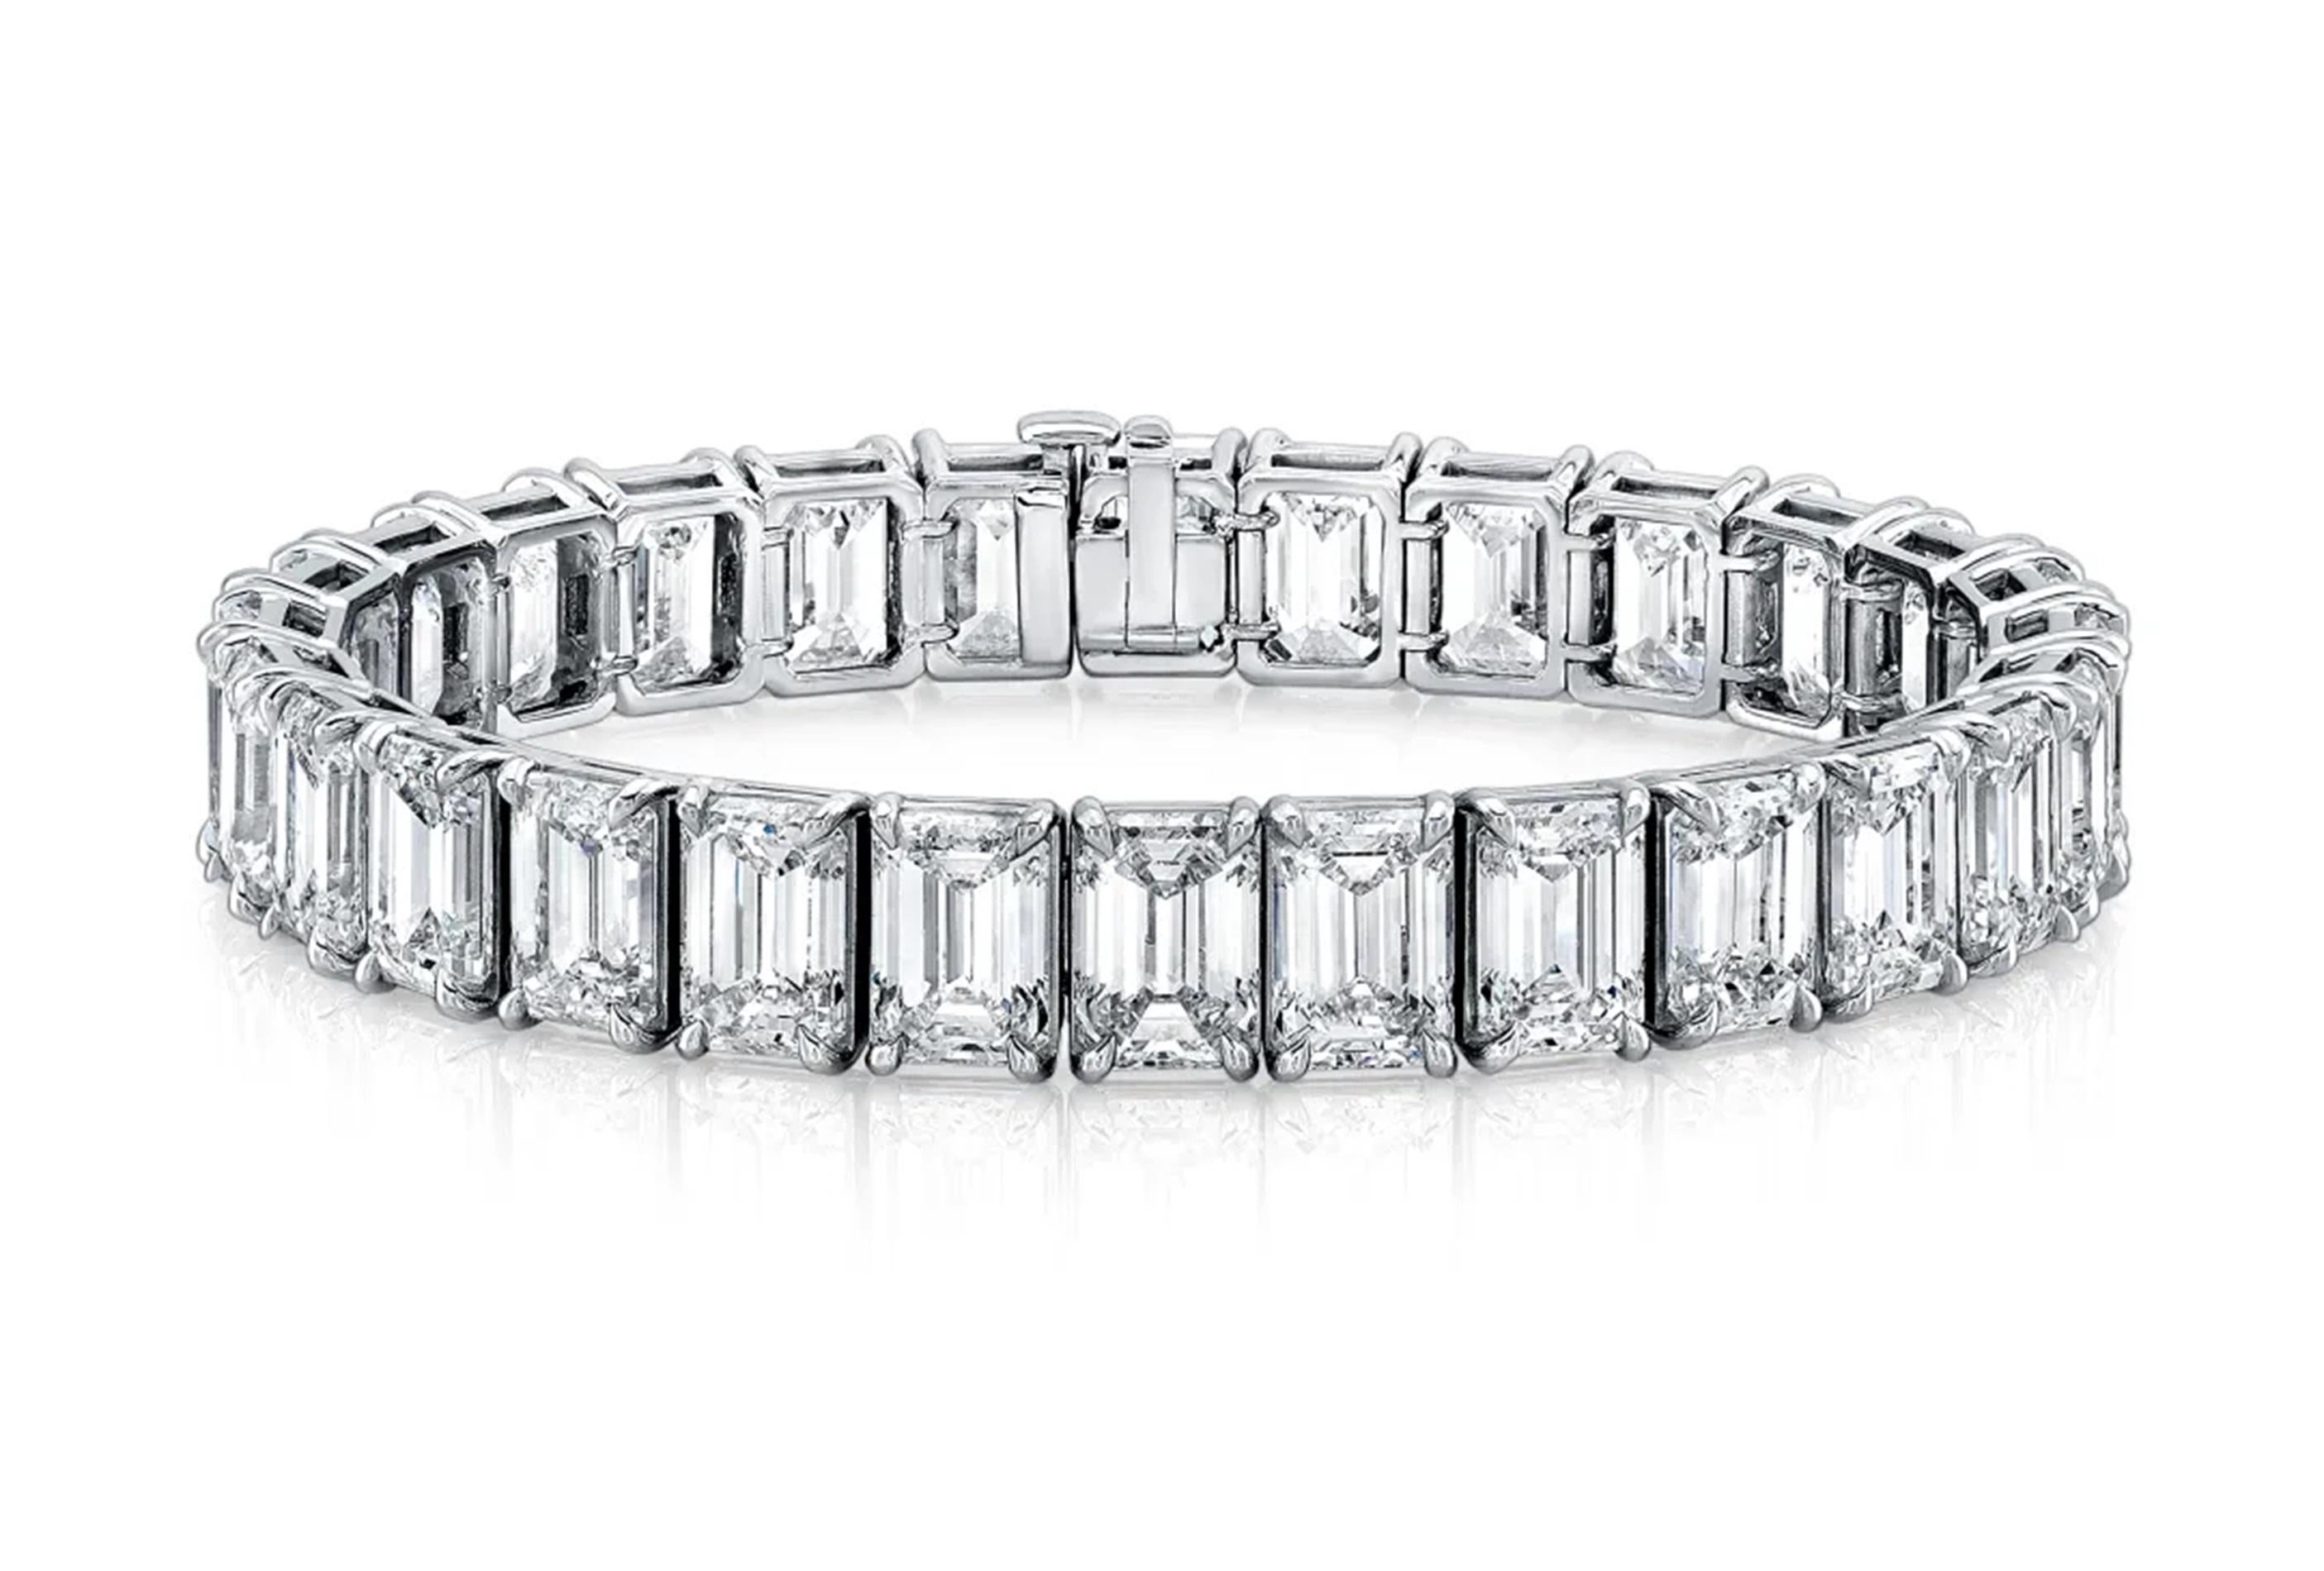 Discover unparalleled sophistication with this majestic bracelet, featuring a flawless assembly of 25.5 carats of 42 GIA-certified emerald cut diamonds, each boasting exceptional D-E-F color grades and clarity ranging from VVS2 to VS2. Every